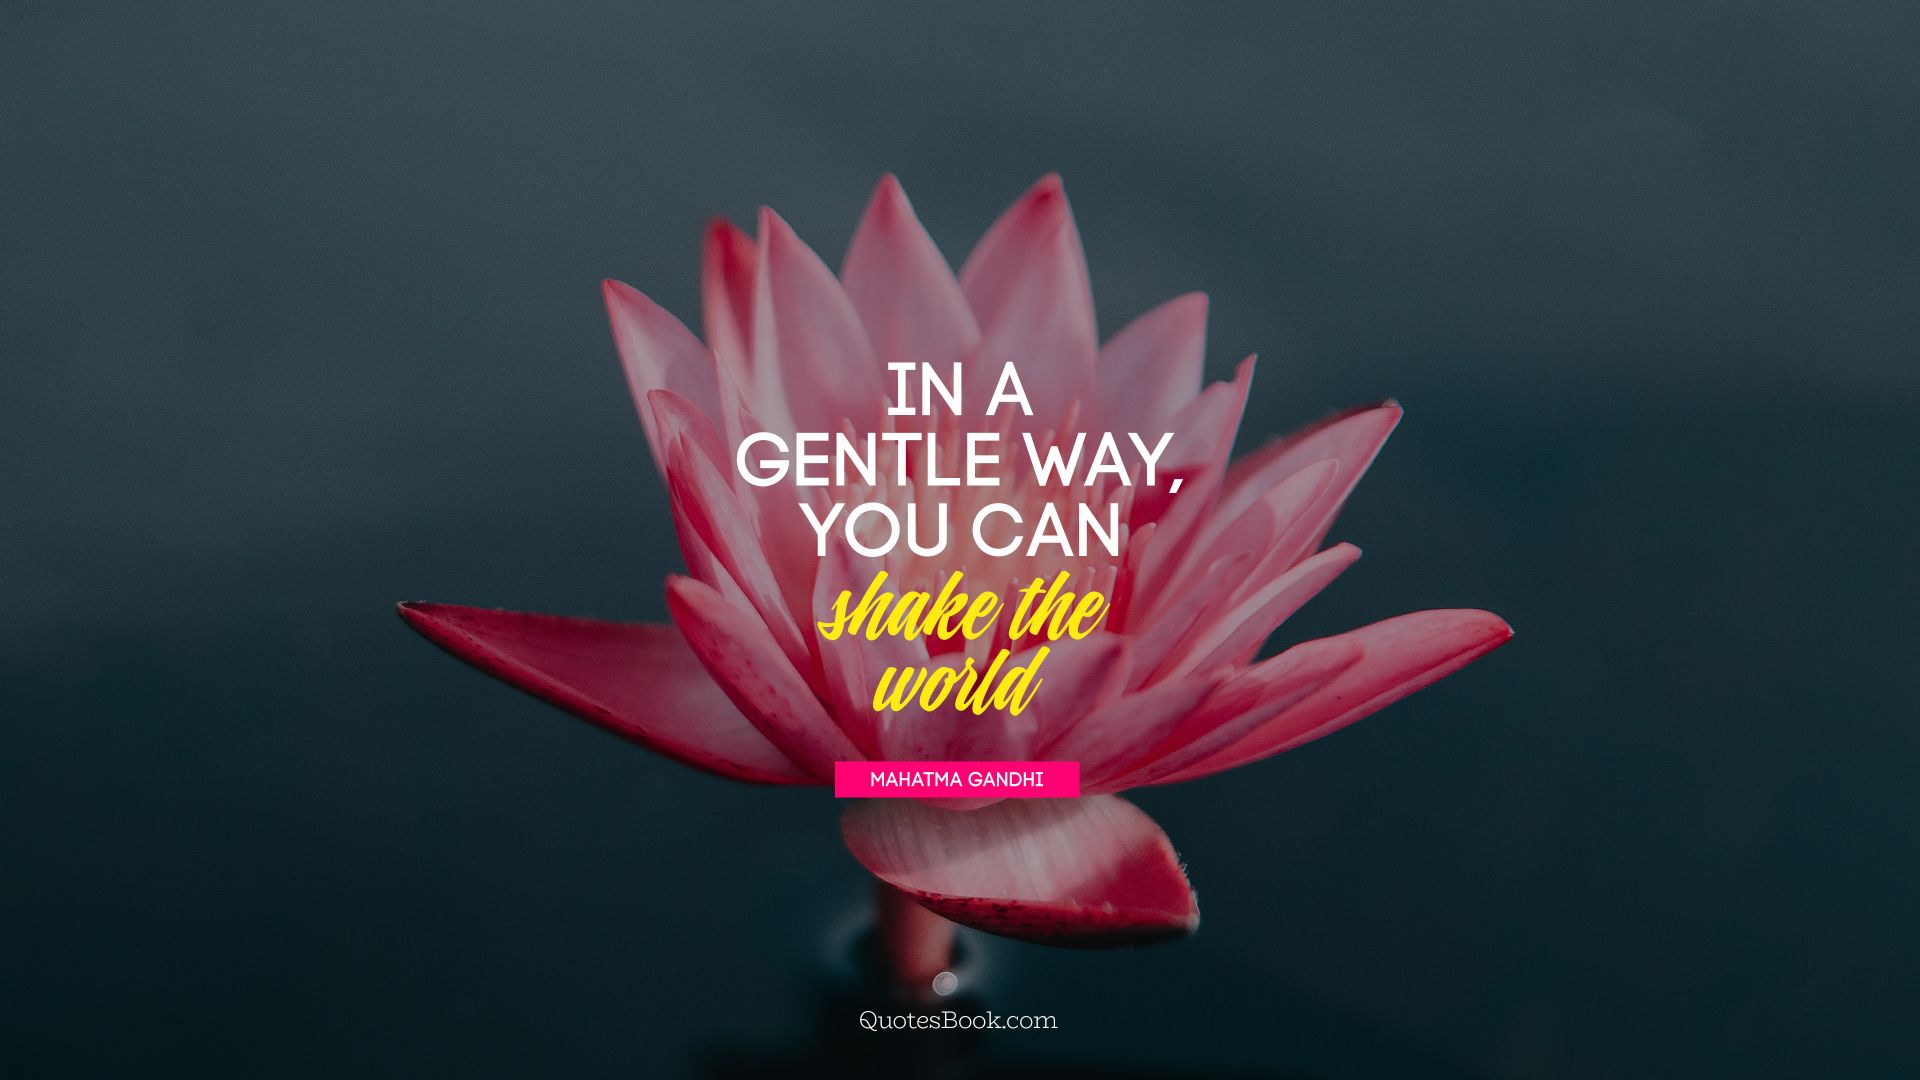 In a gentle way, you can shake the 
world. - Quote by Mahatma Gandhi